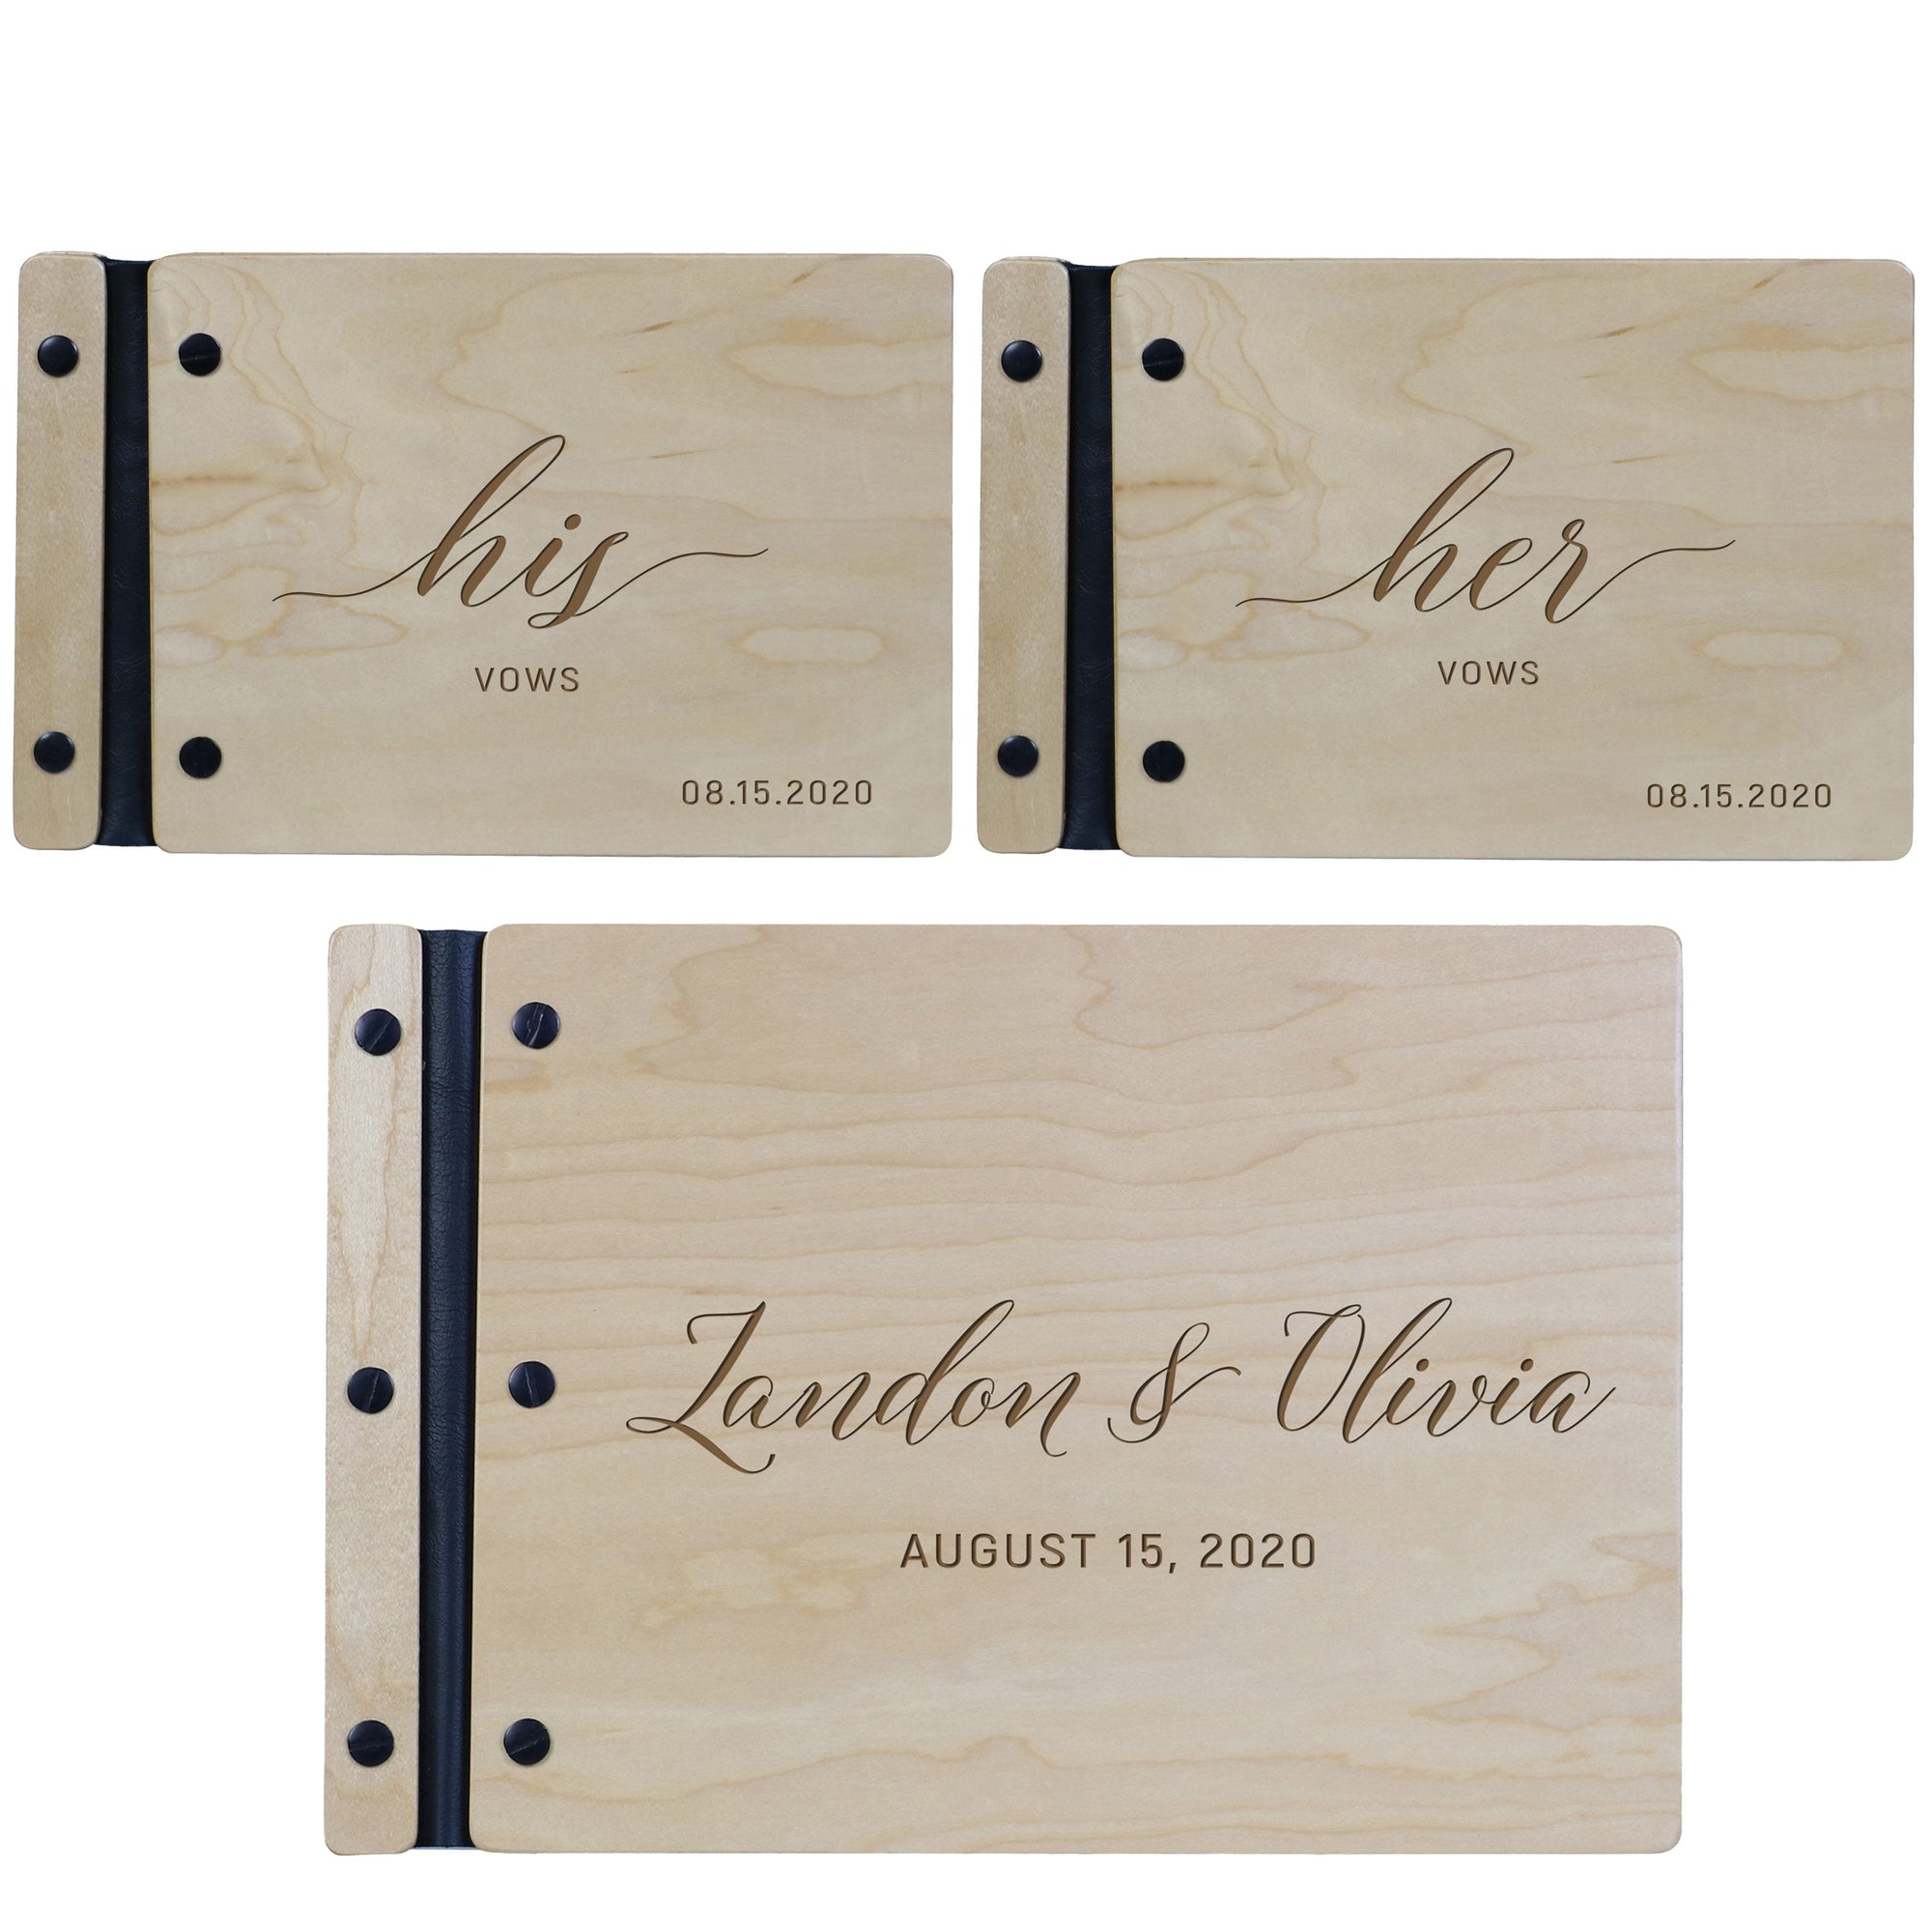 LifeSong Milestones Personalized Wedding Marriage Vow 3 Piece Guest Books - Husband and Wife Marriage Celebration, Custom Engraved Wooden Signature Registry Guest Book